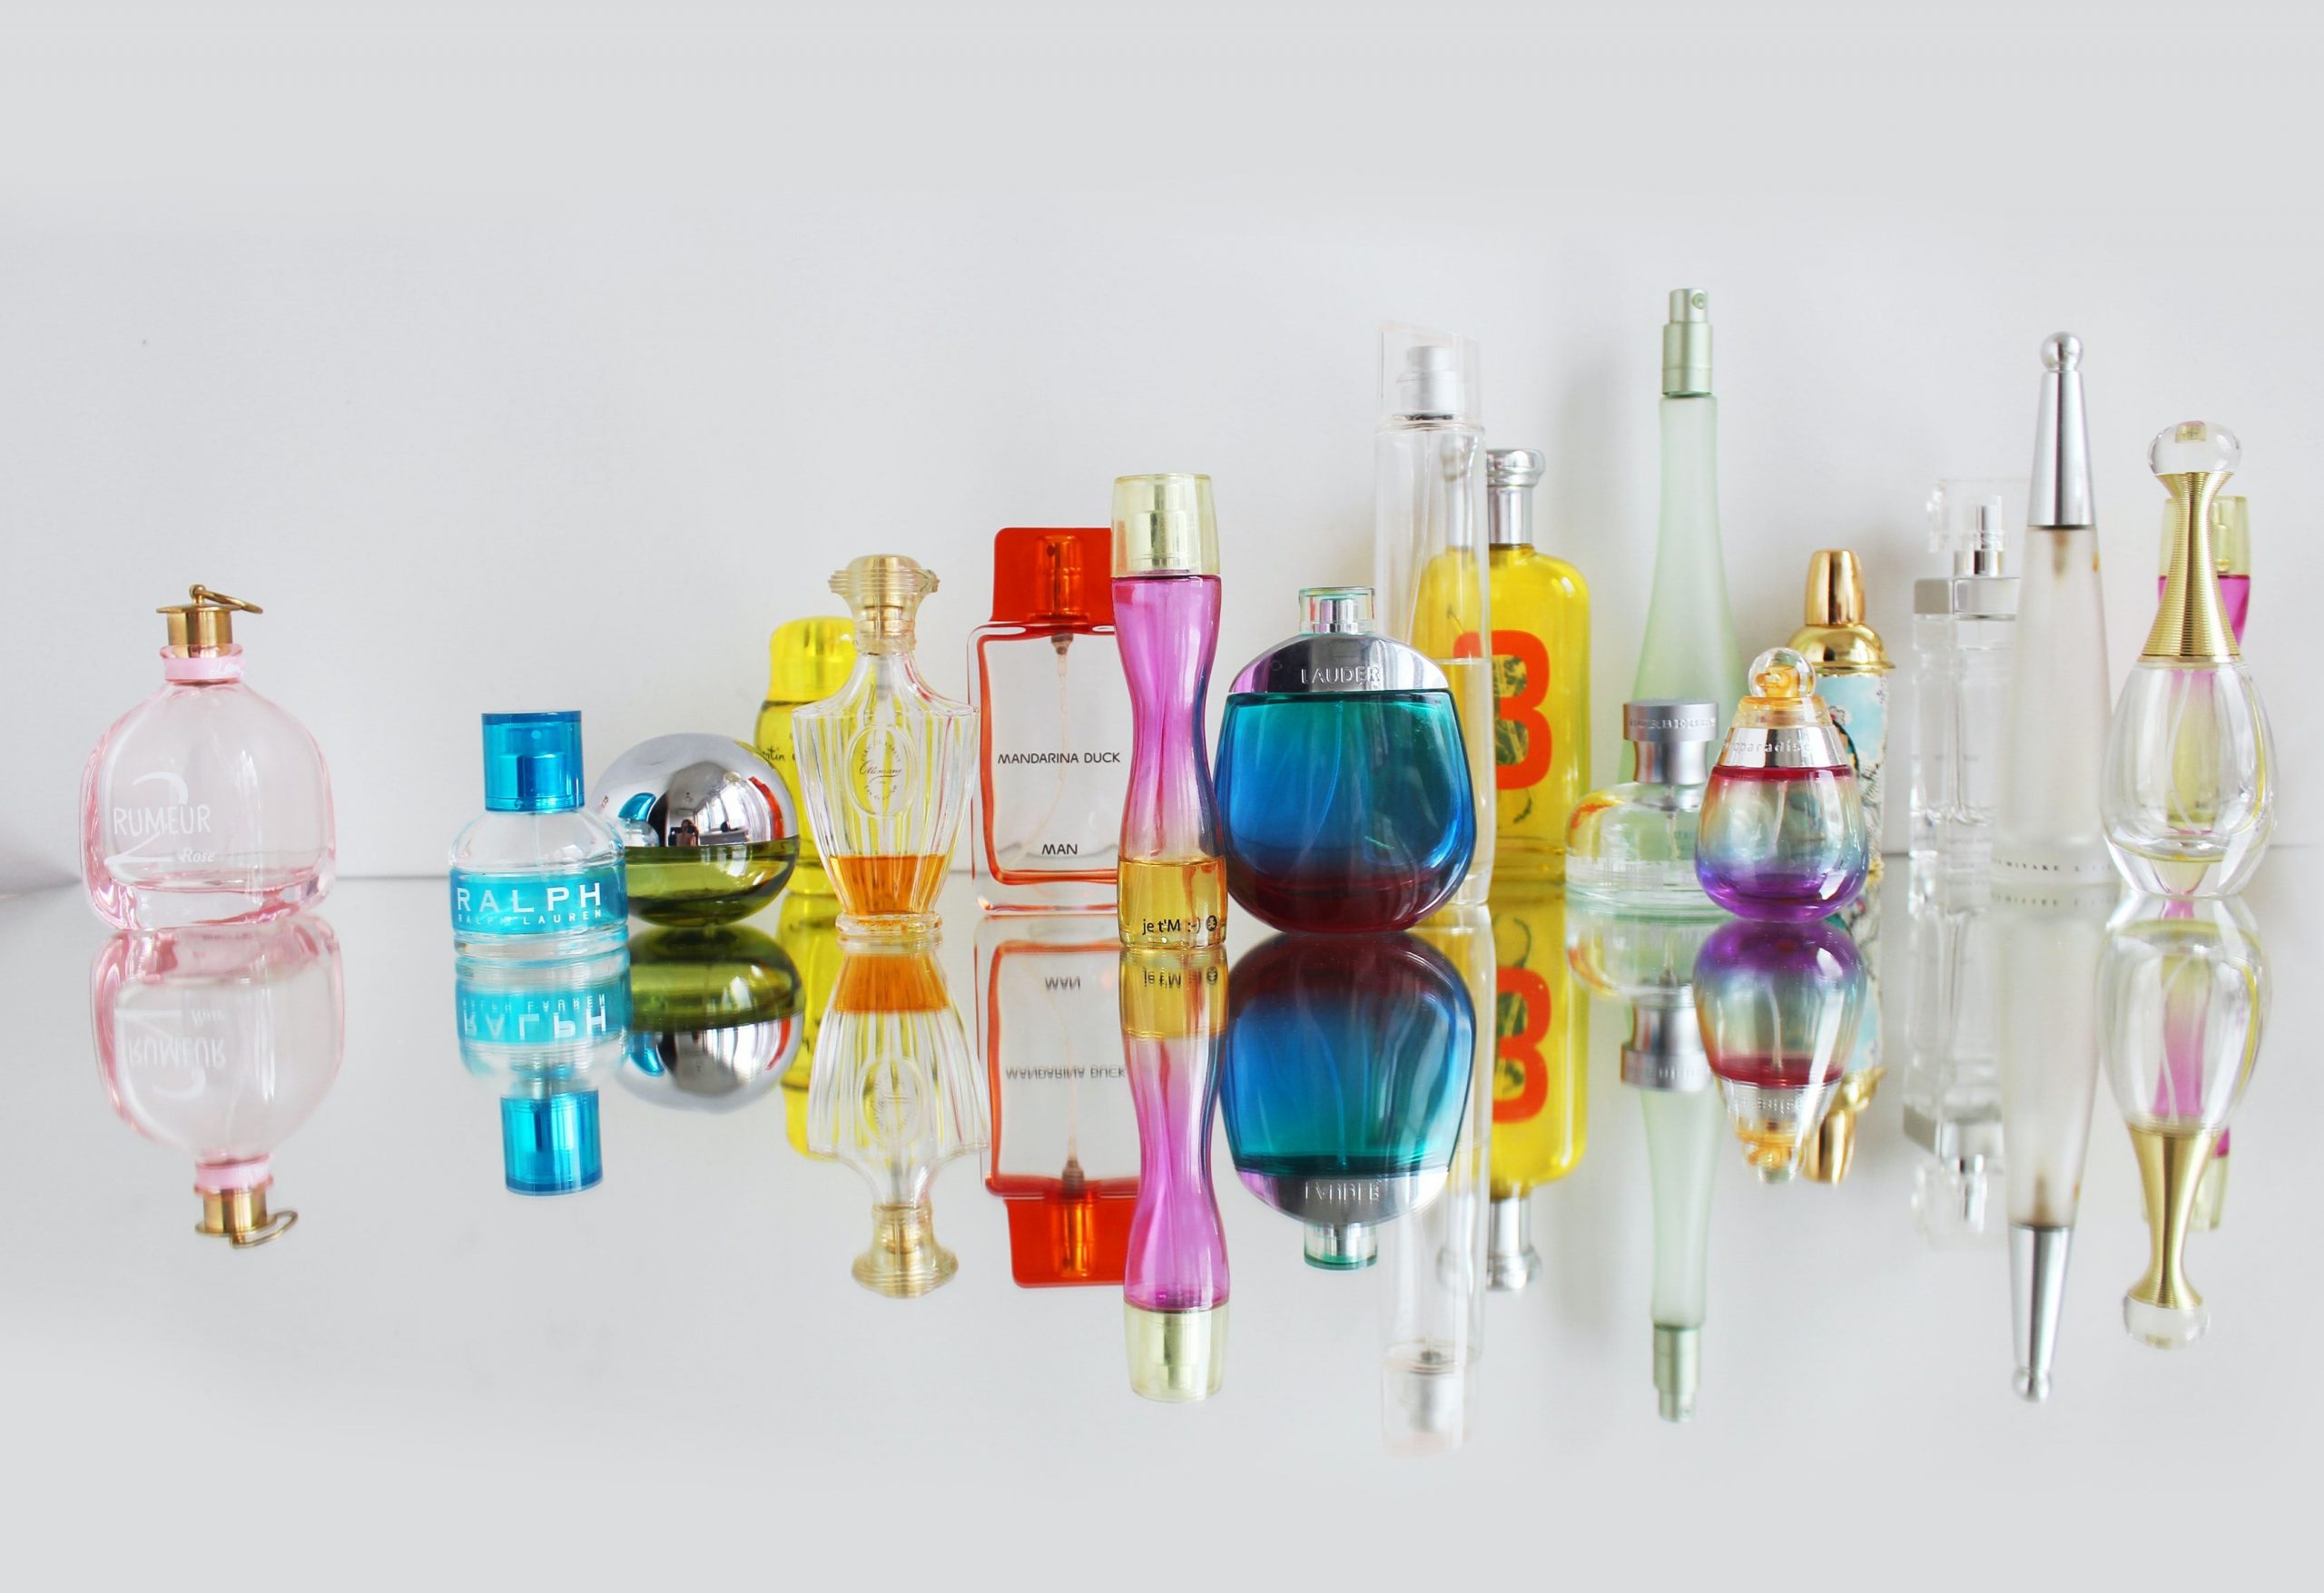 Here’s how you can recycle unused perfume